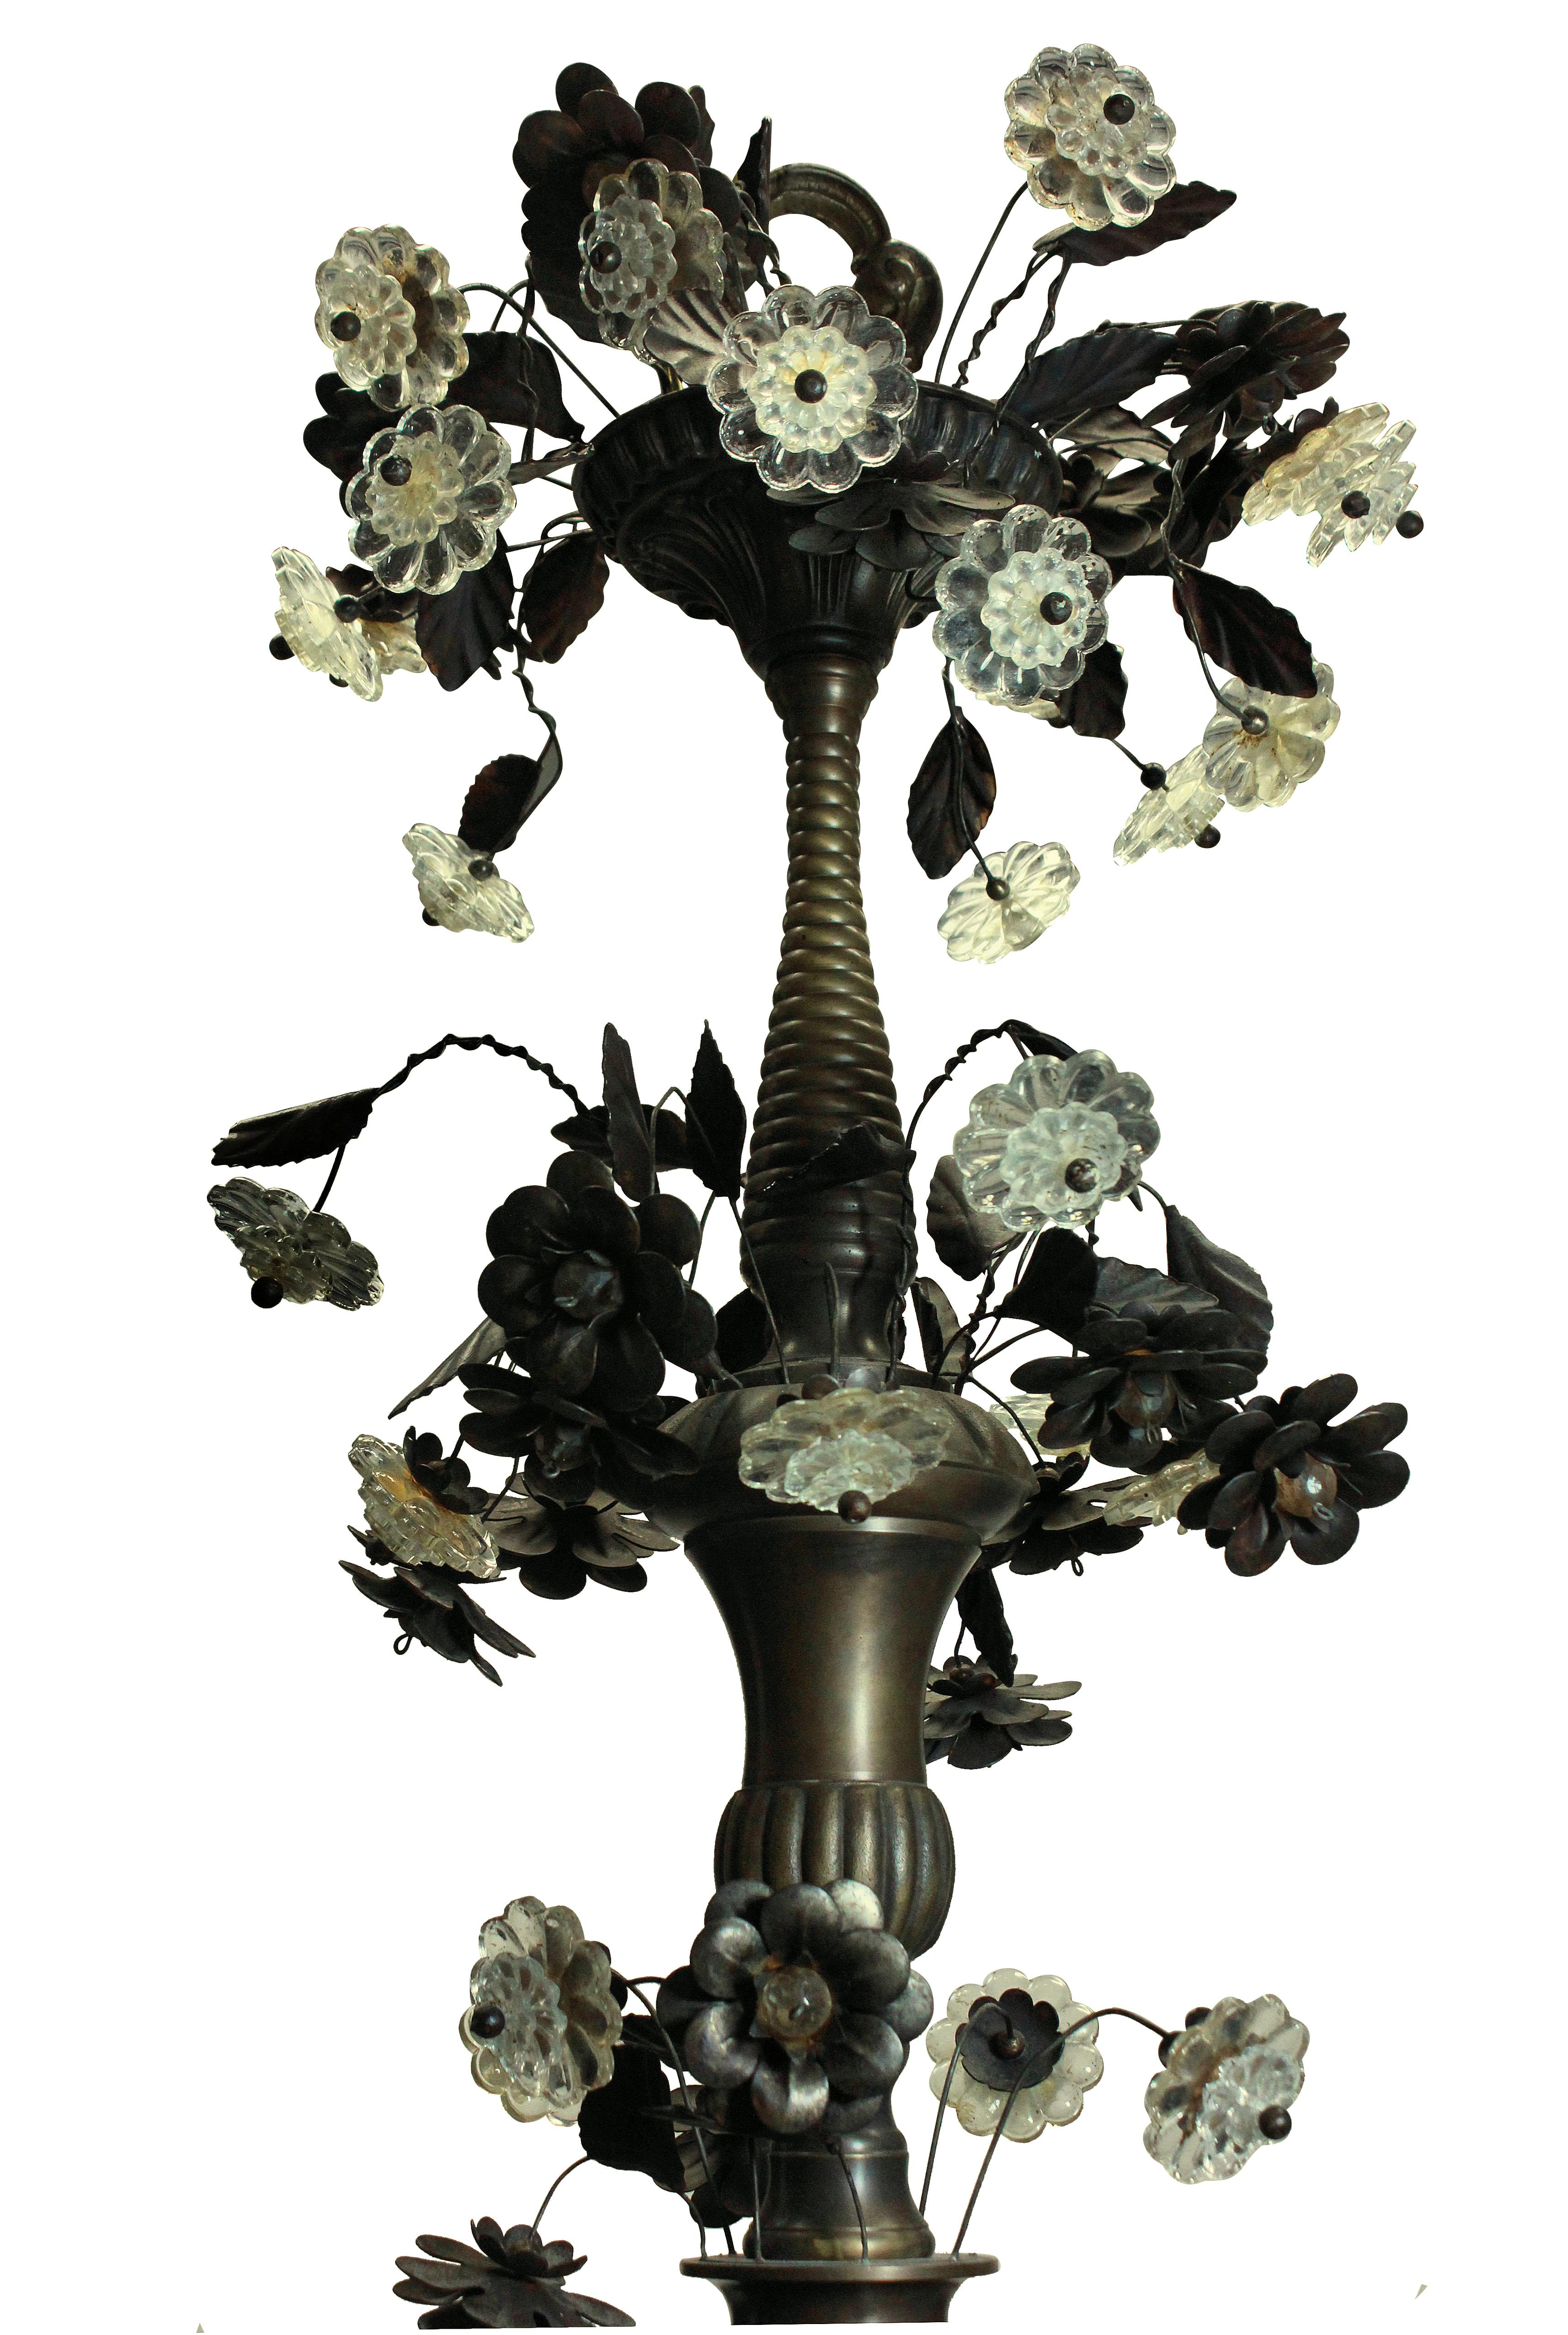 A large English bronzed chandelier of elegant proportions with eight arms, decorated throughout with delicate leaves and cut-glass flowers.